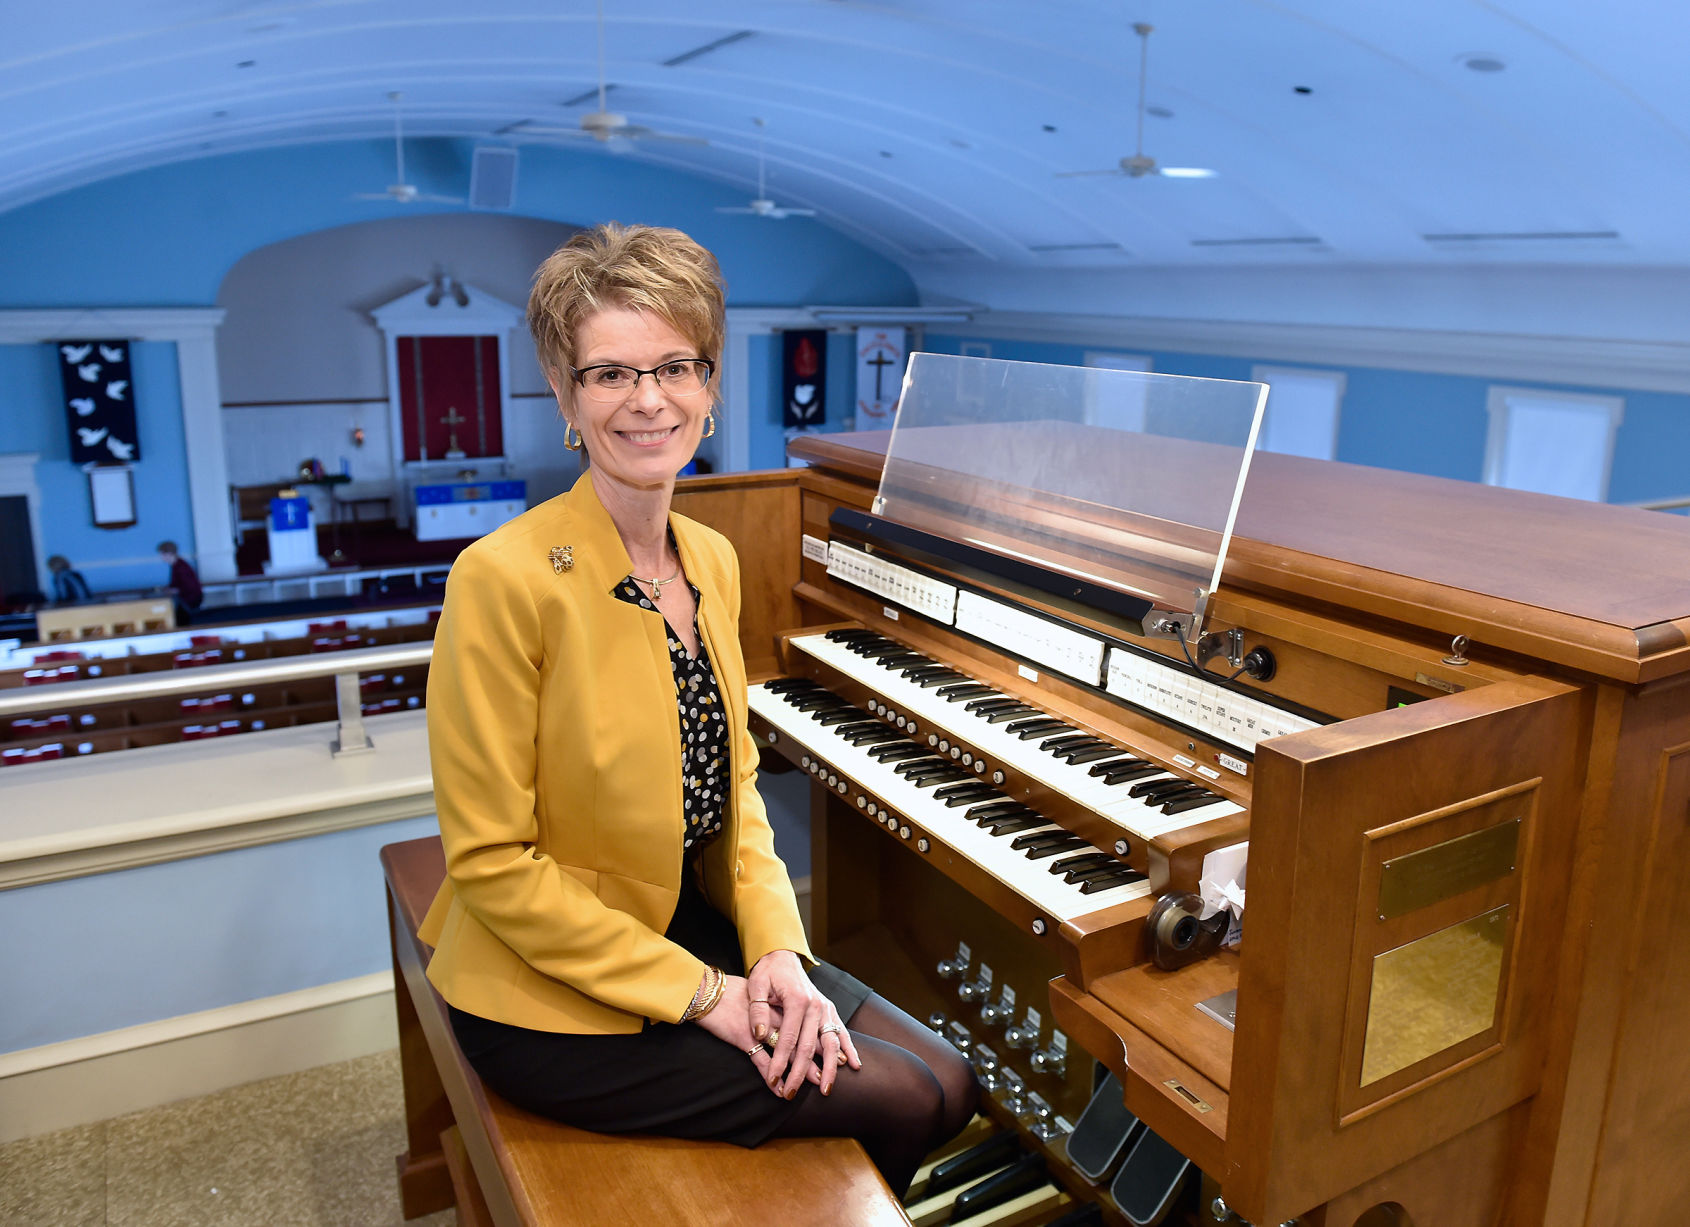 For 40 years, Linda Binder has provided the soundtrack for New Hollands Trinity Lutheran Church Life and Culture lancasteronline